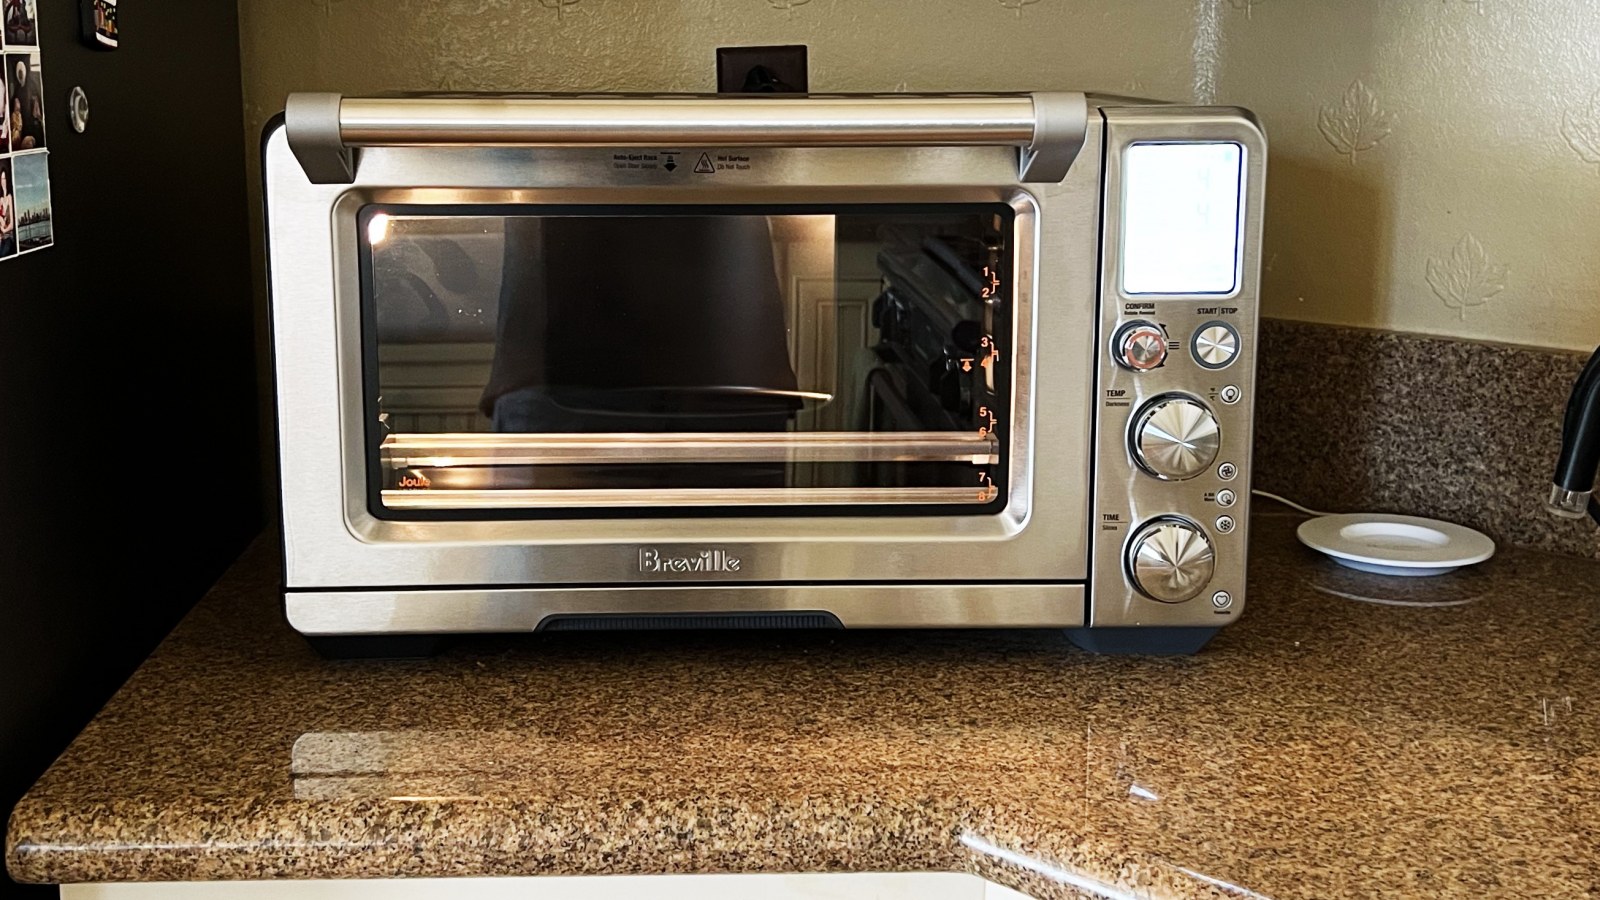 Breville Joule Oven Air Fryer Pro review: one really smart oven